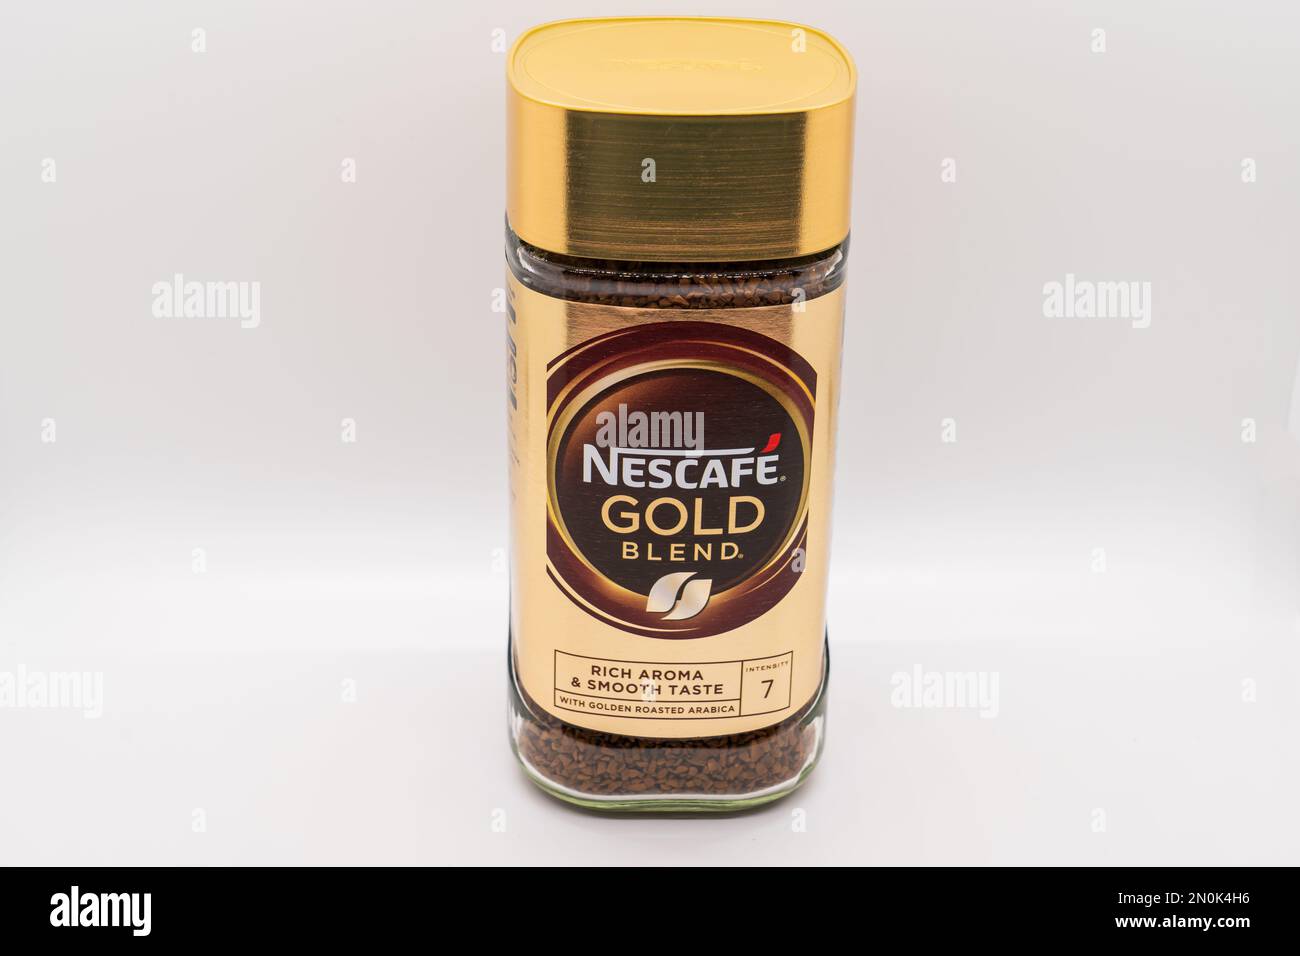 Winter Favourites Collection Nescafe Dolce Gusto Coffee Pods -  Xclusivebrandsbd